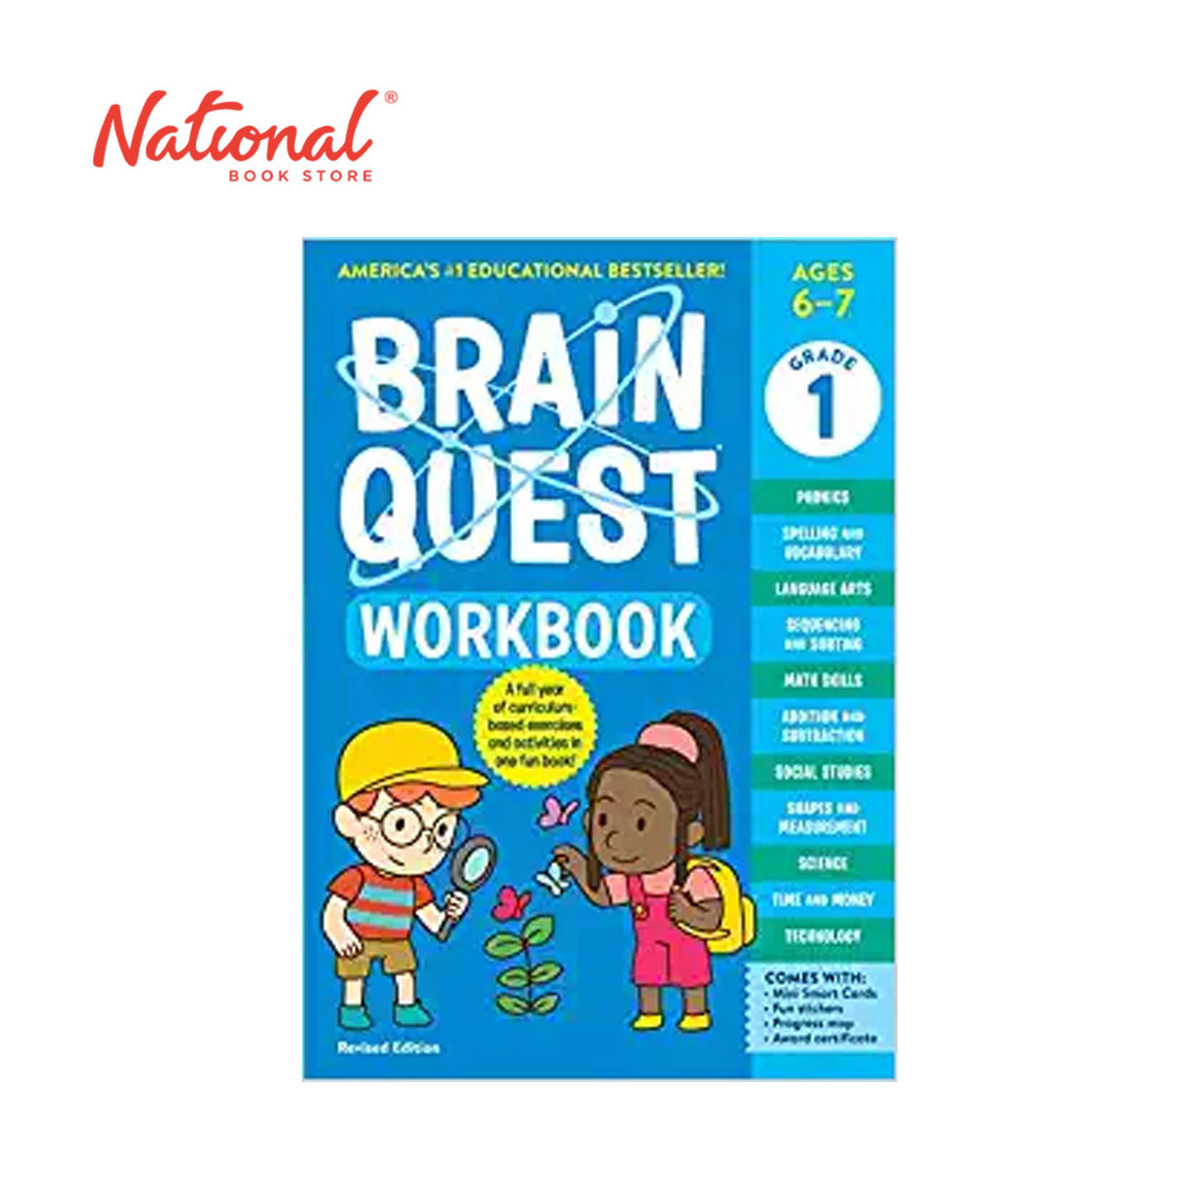 Brain Quest Workbook: 1st Grade Revised Edition - Trade Paperback - Activity Books for Kids